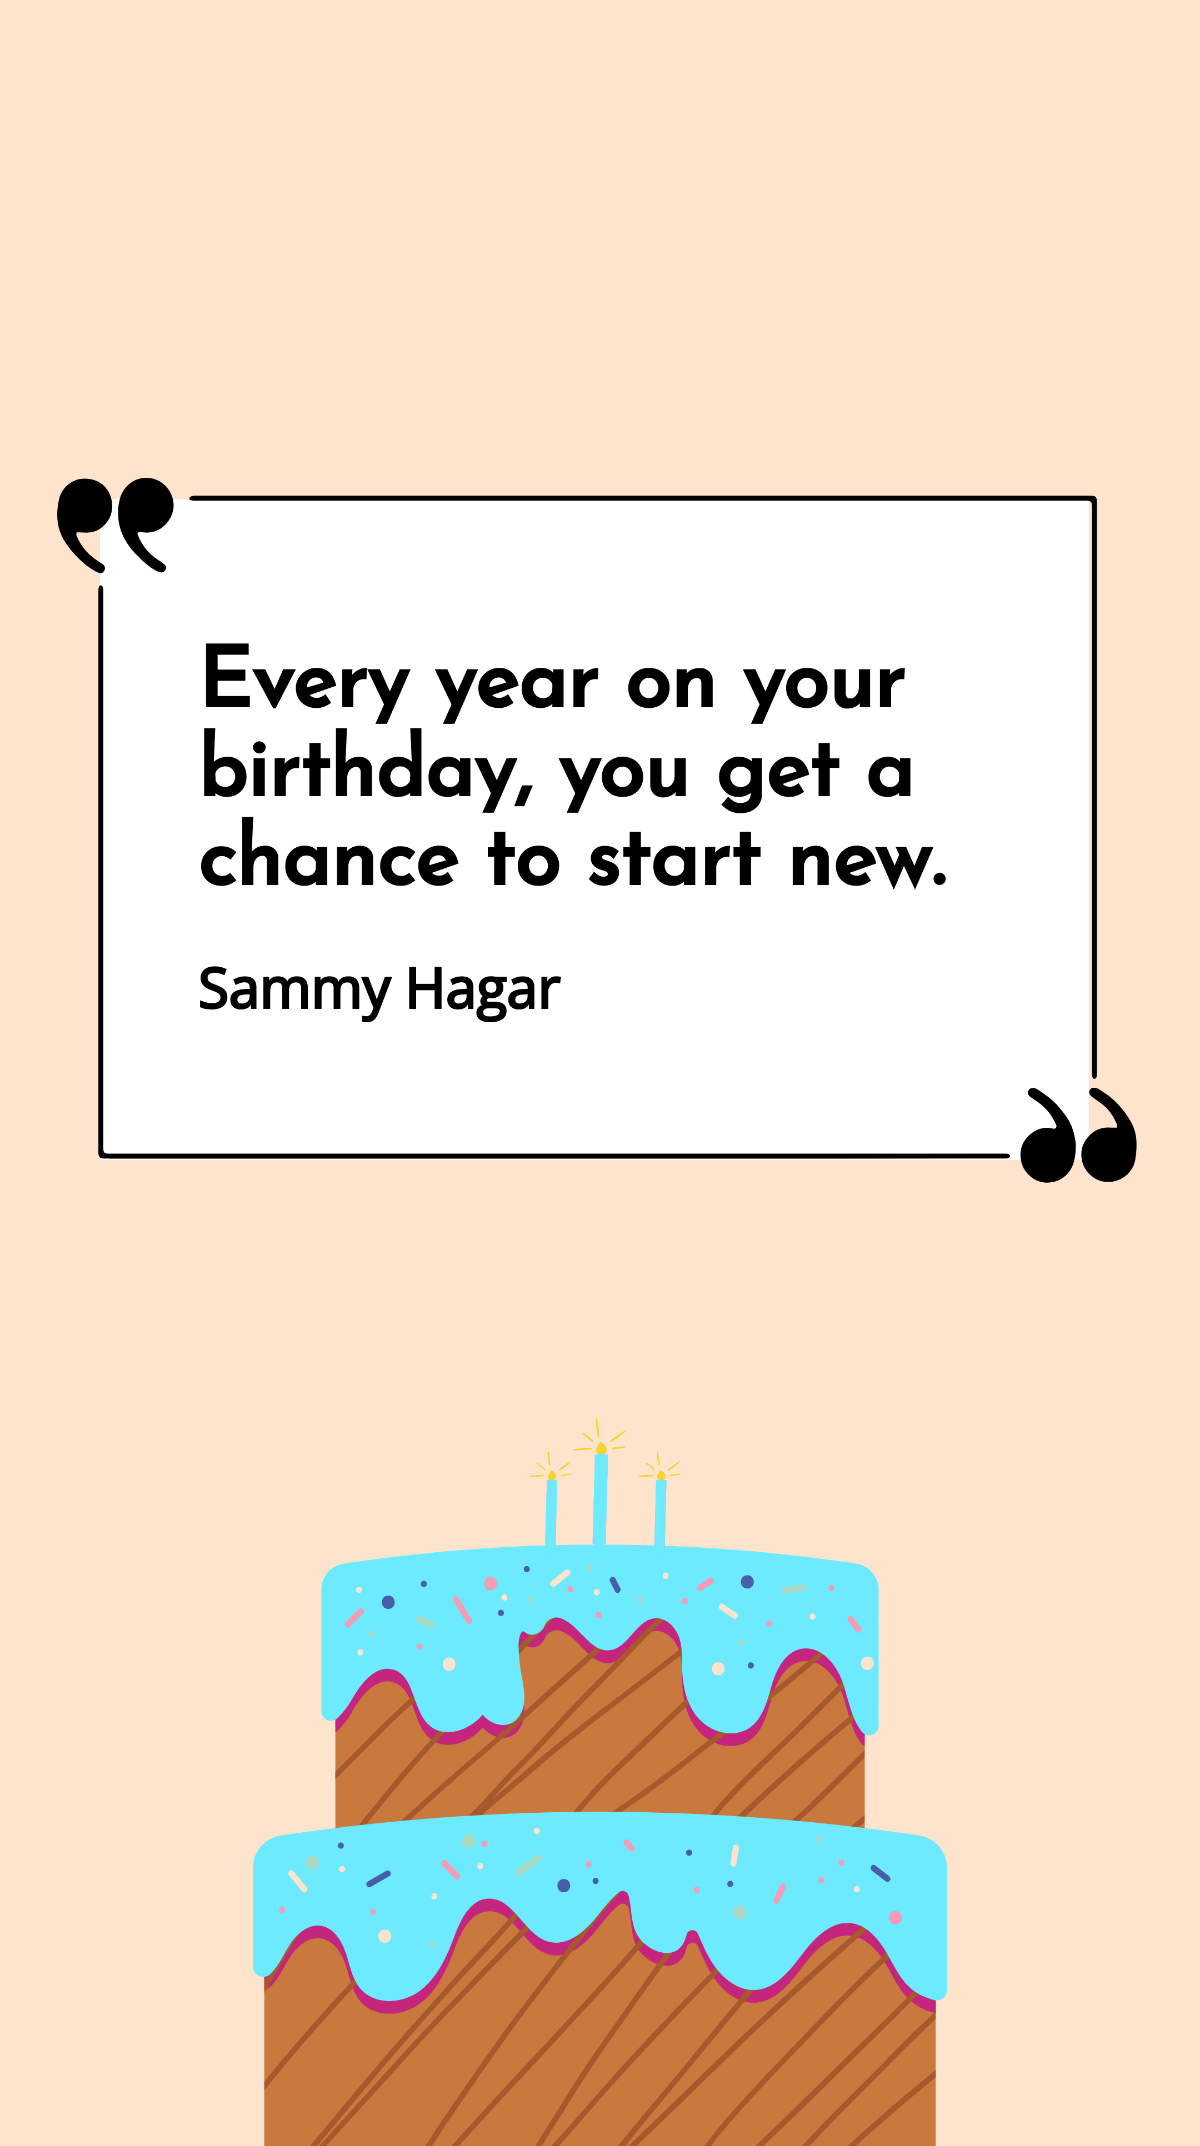 Sammy Hagar - Every year on your birthday, you get a chance to start new. Template